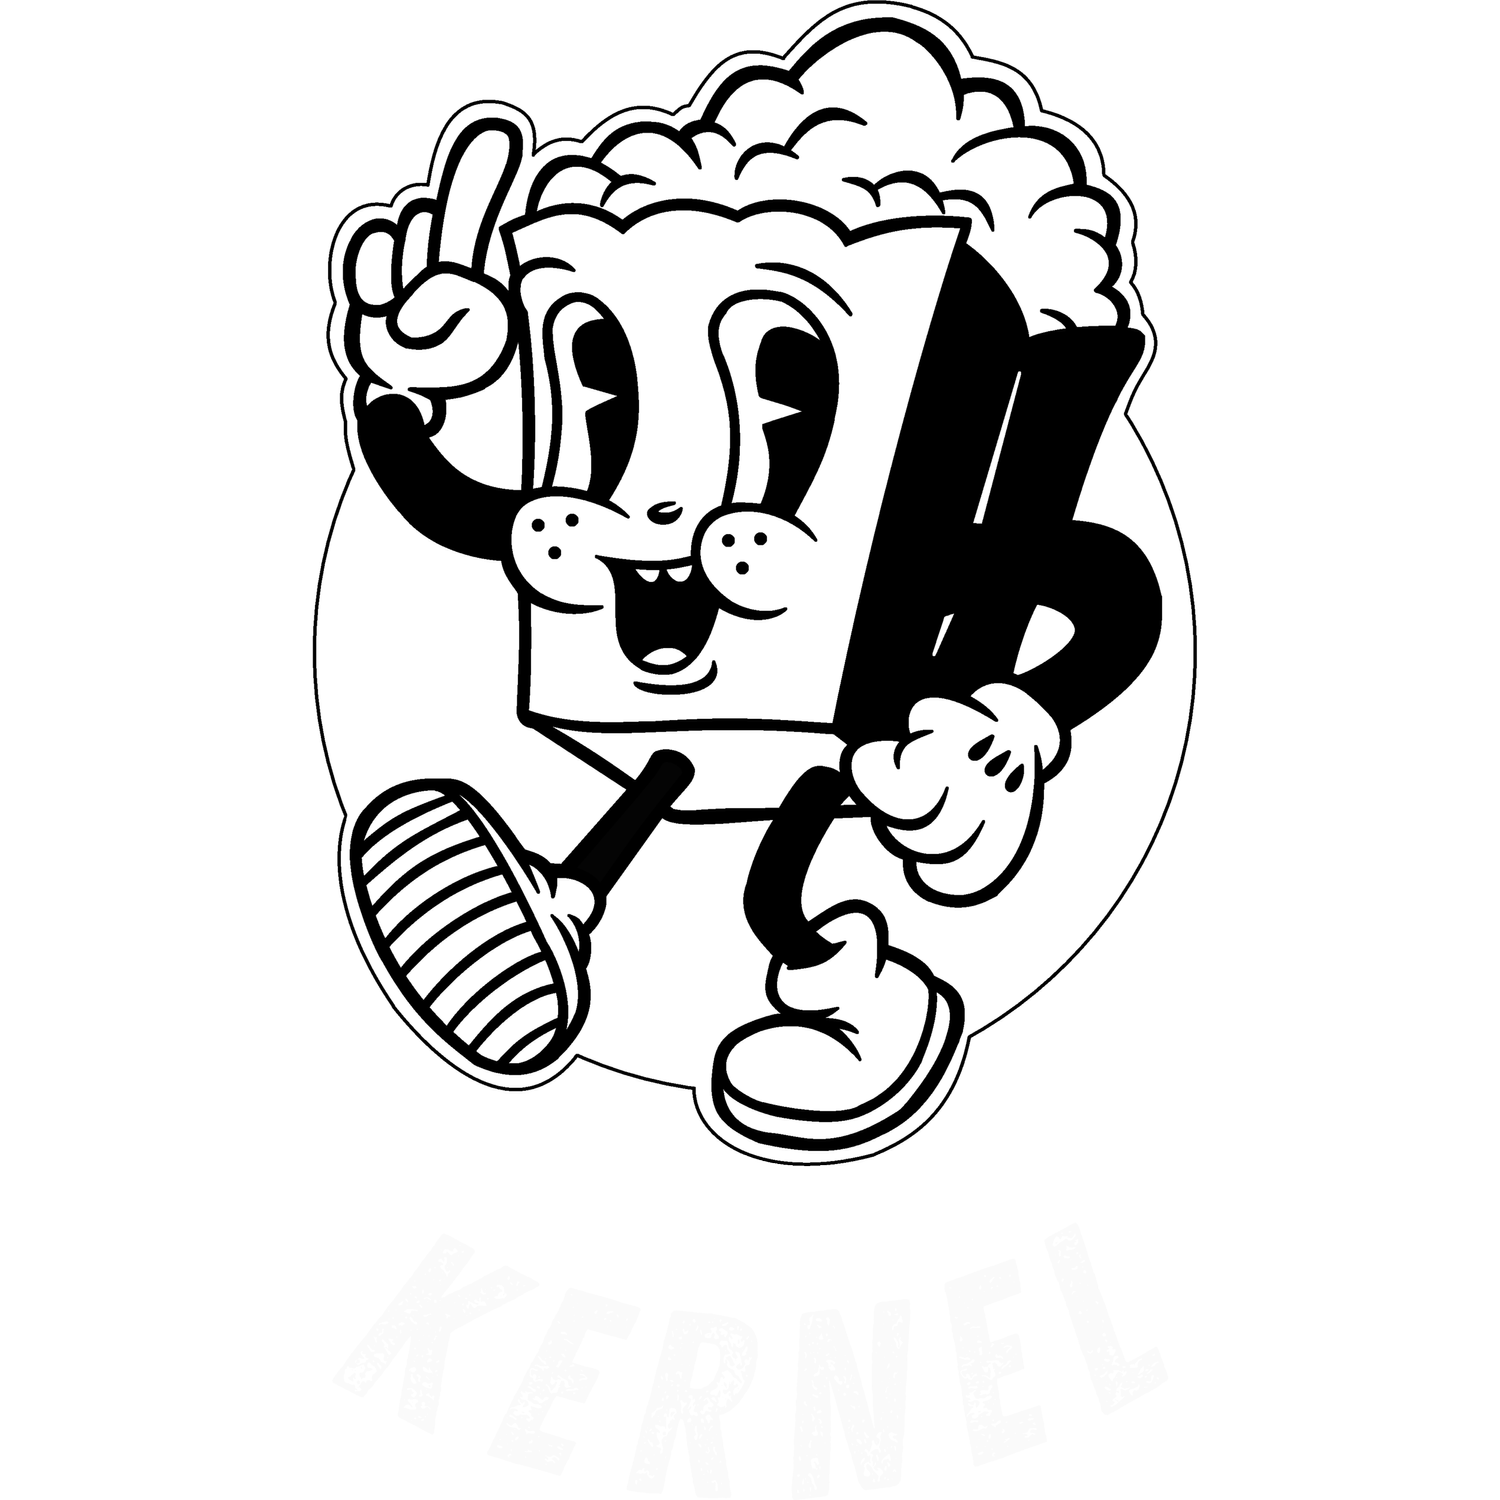 Kernel Productions